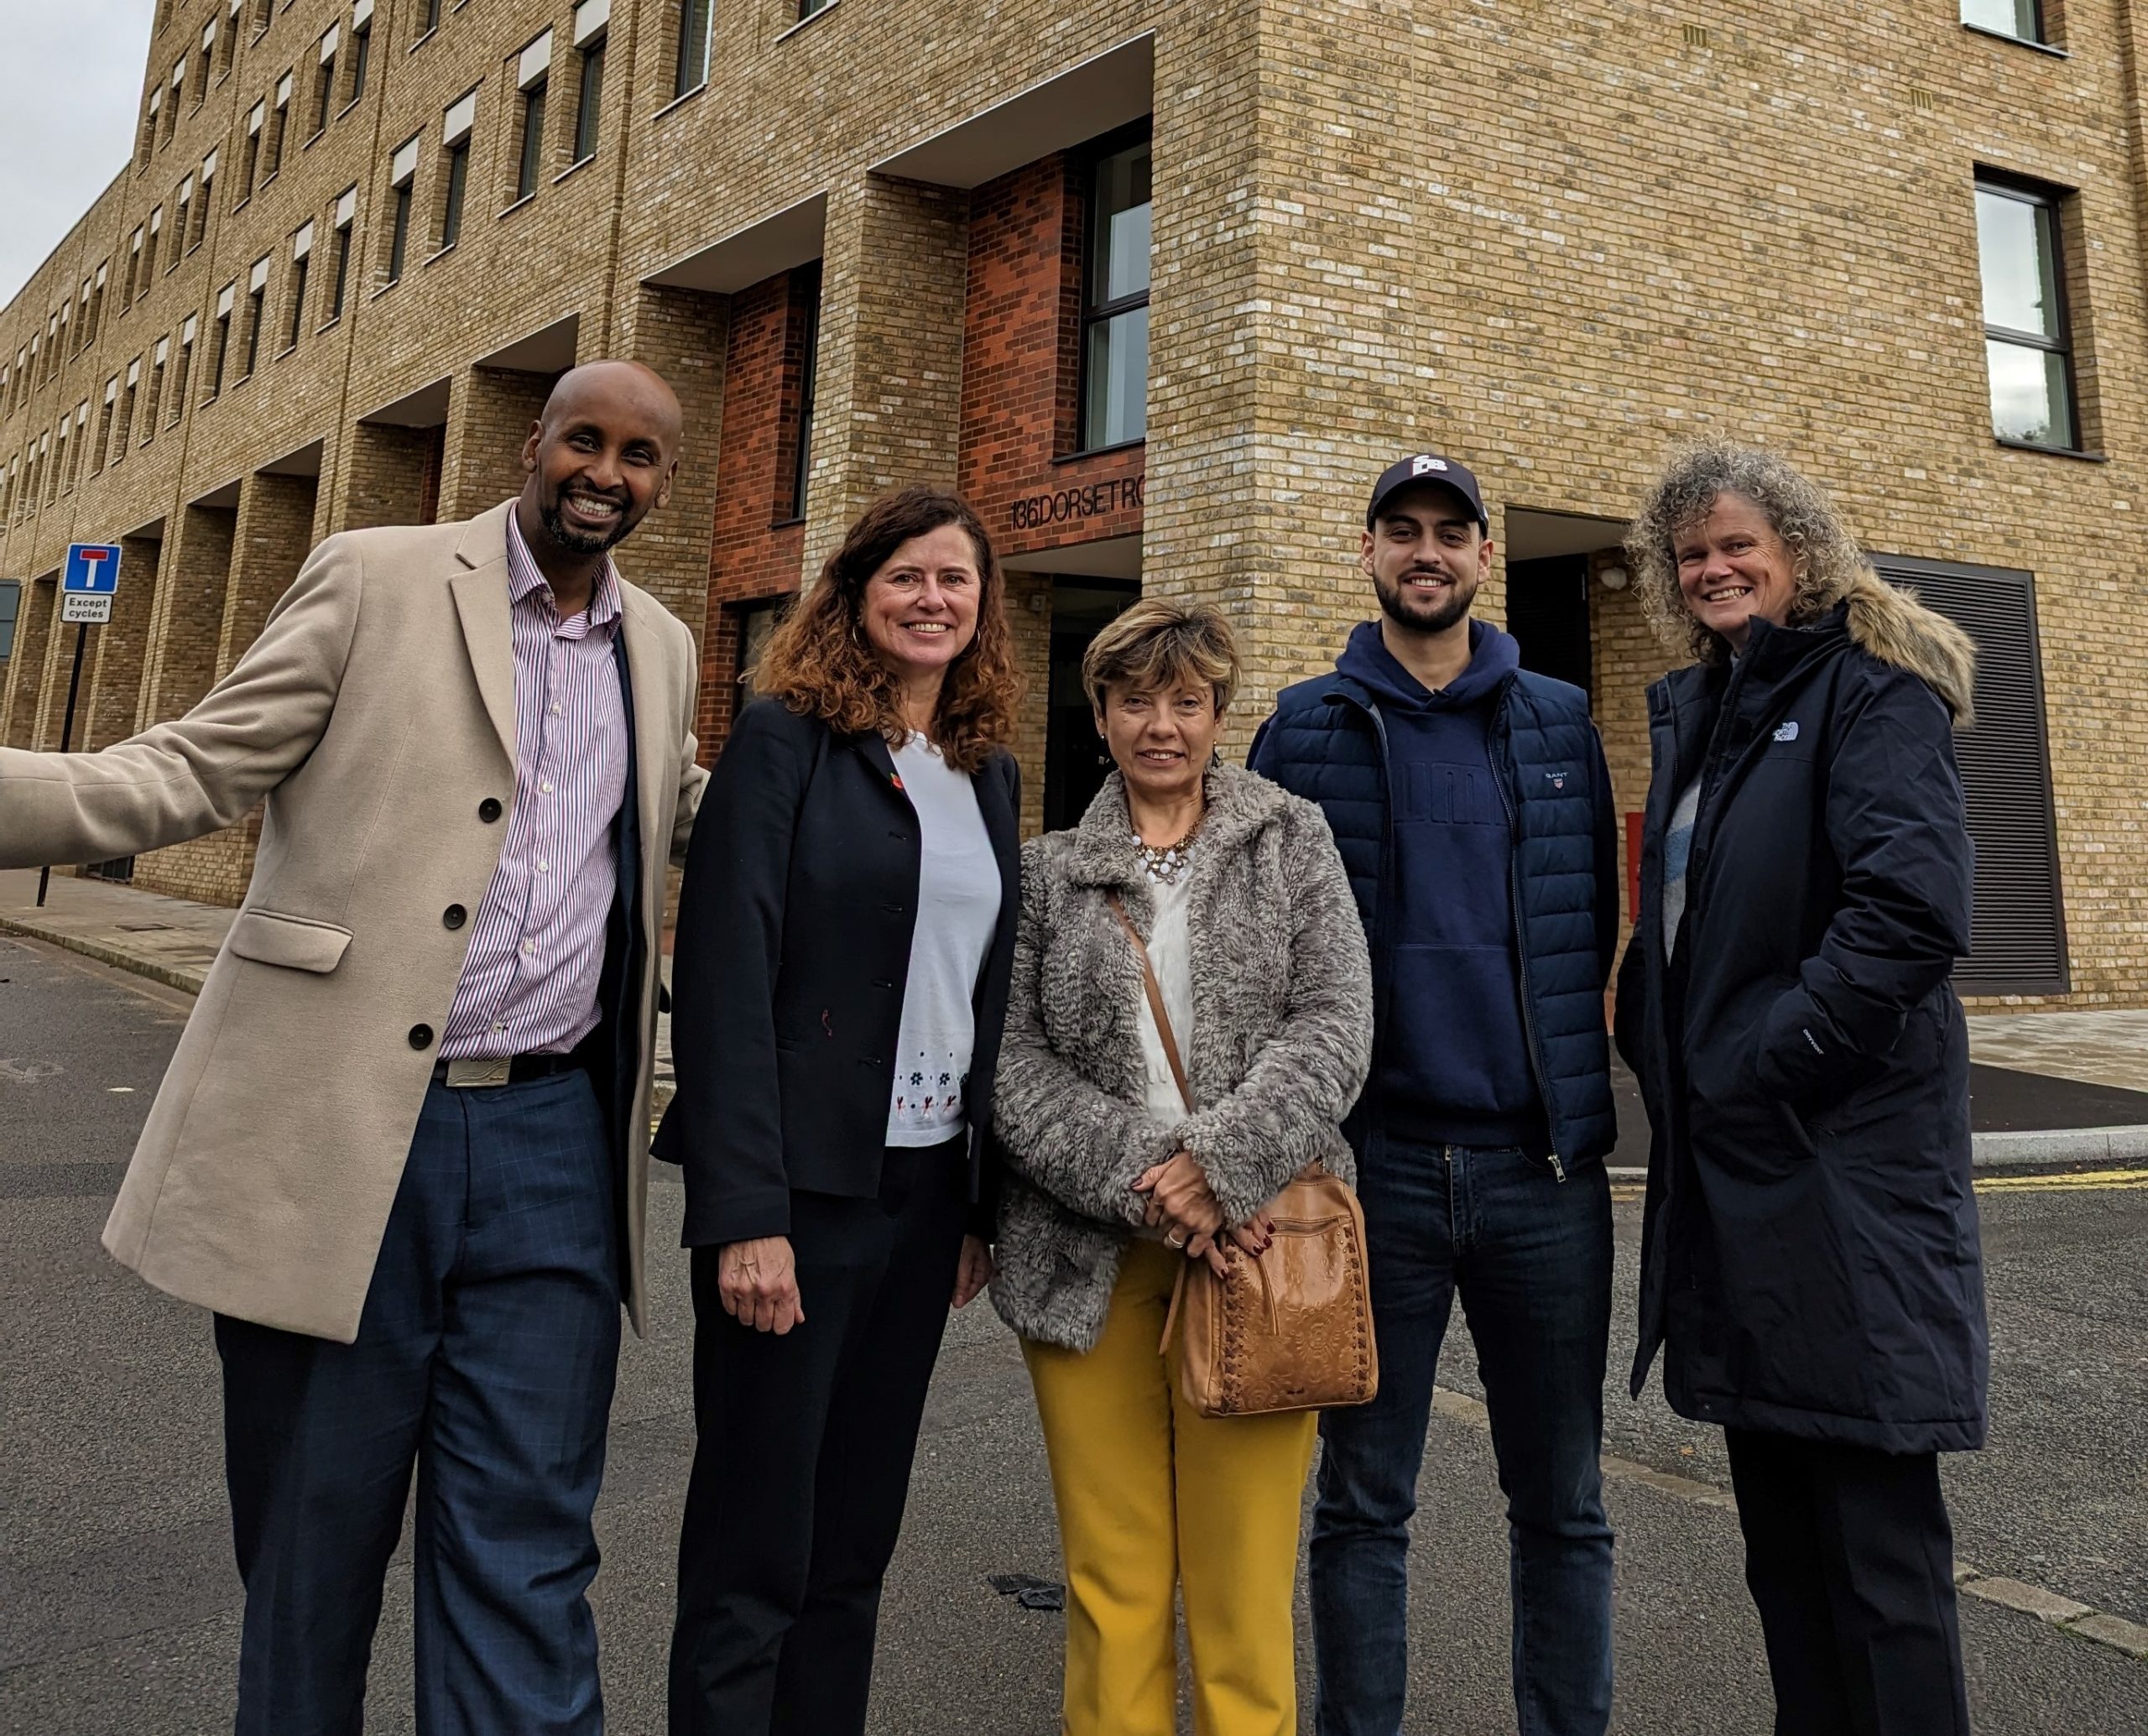 Lambeth tenants welcomed to their new council-built homes